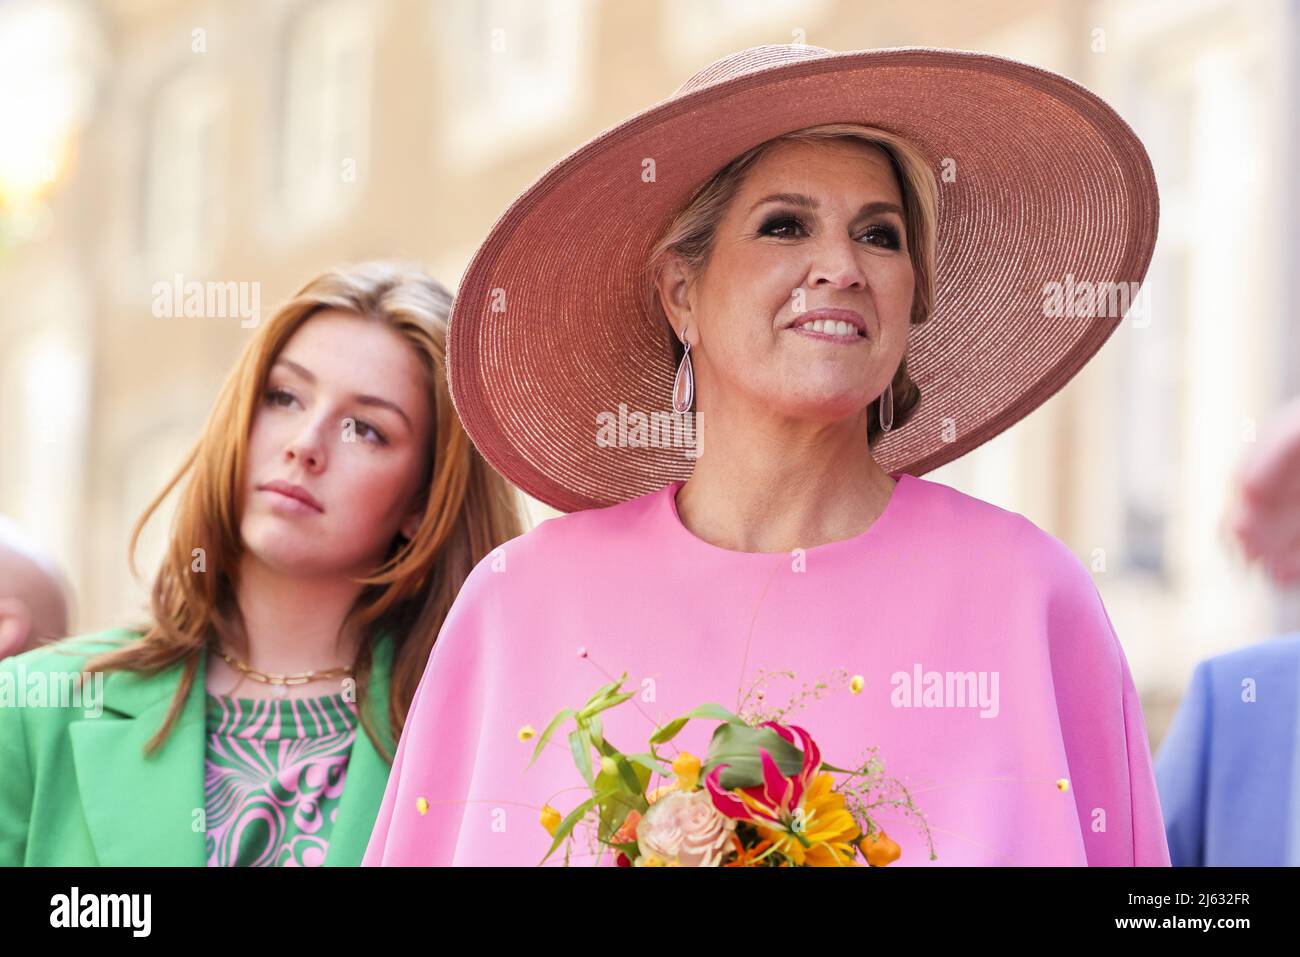 2022-04-27 12:40:36 MAASTRICHT - Princess Alexia, Queen Maxima during  King's Day in Maastricht.